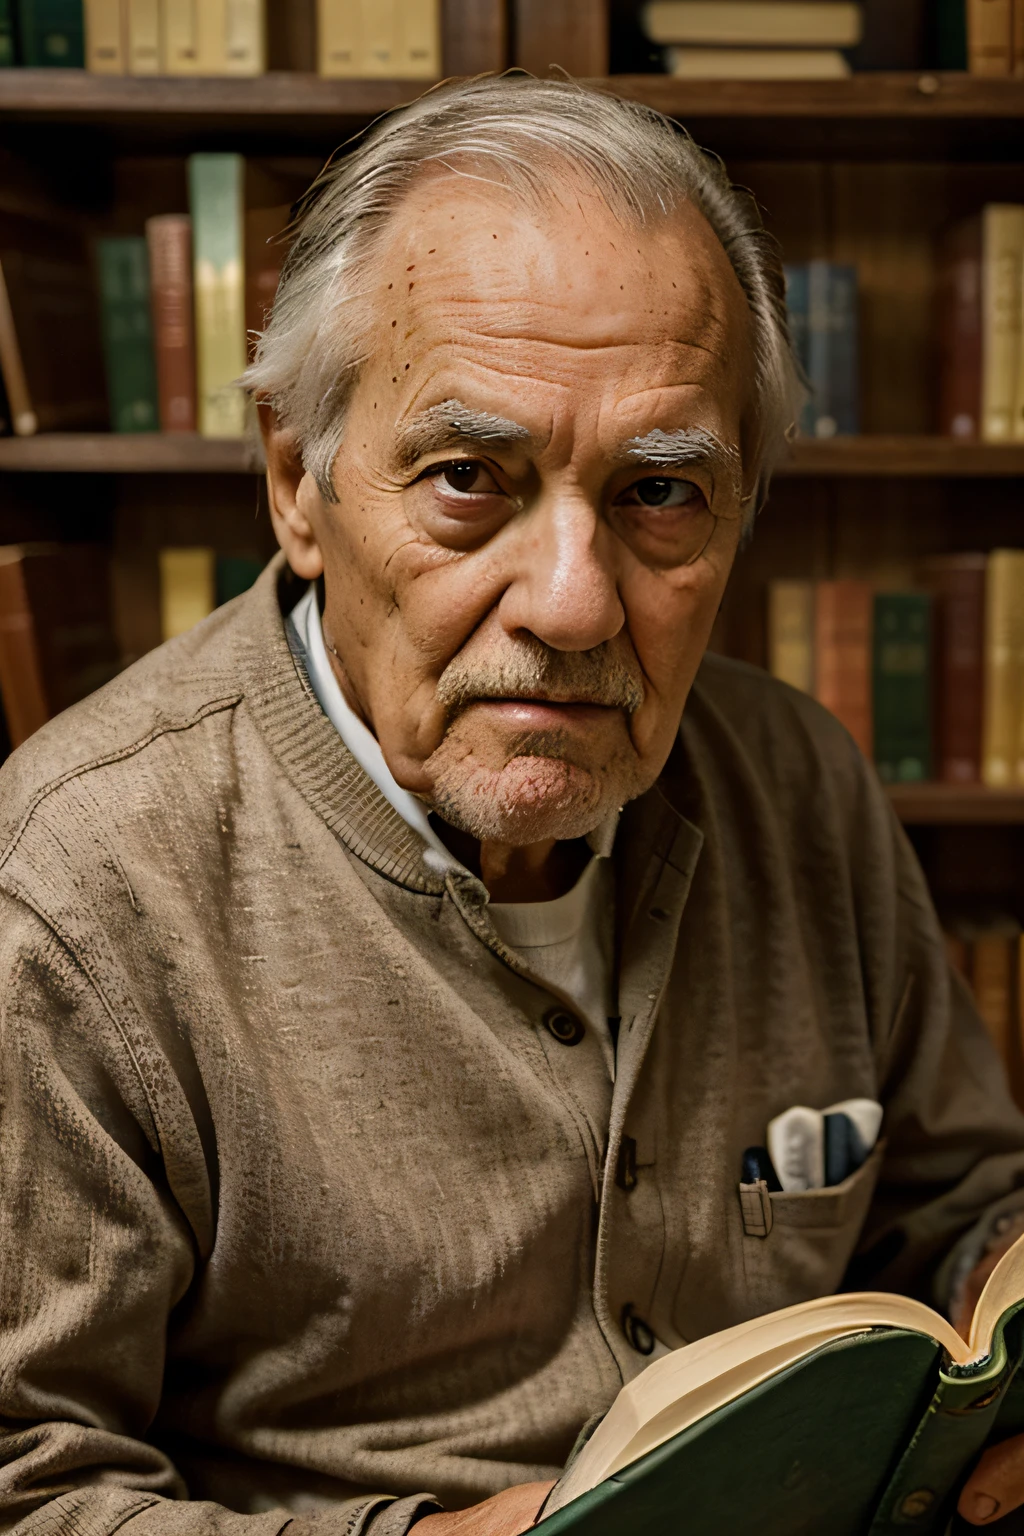 wise old man, in the library room, sitting on a chair holding a book, facing the camera, close up